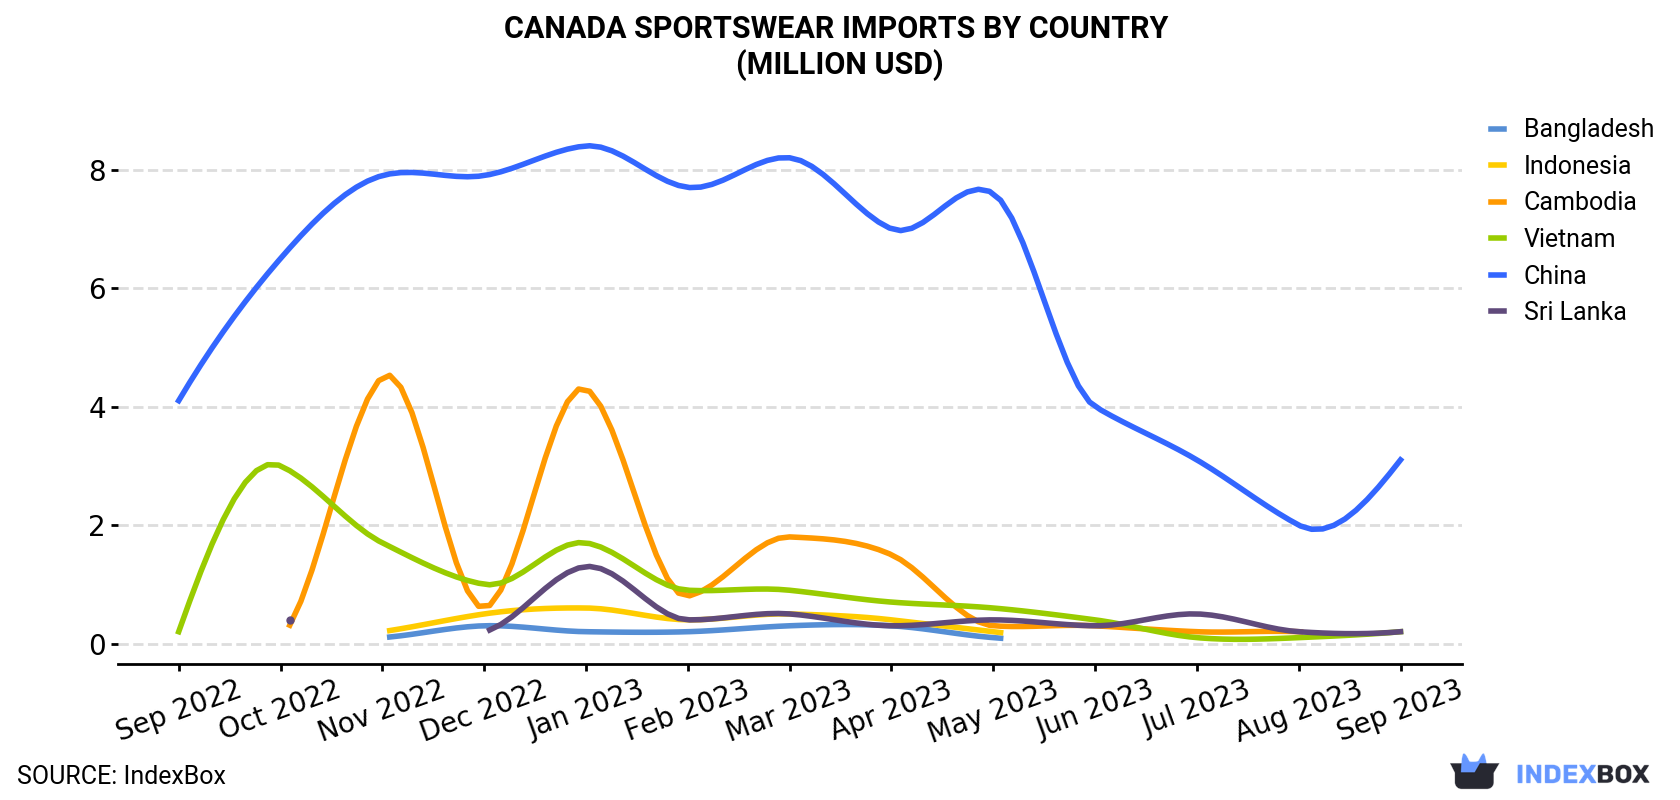 Canada Sportswear Imports By Country (Million USD)